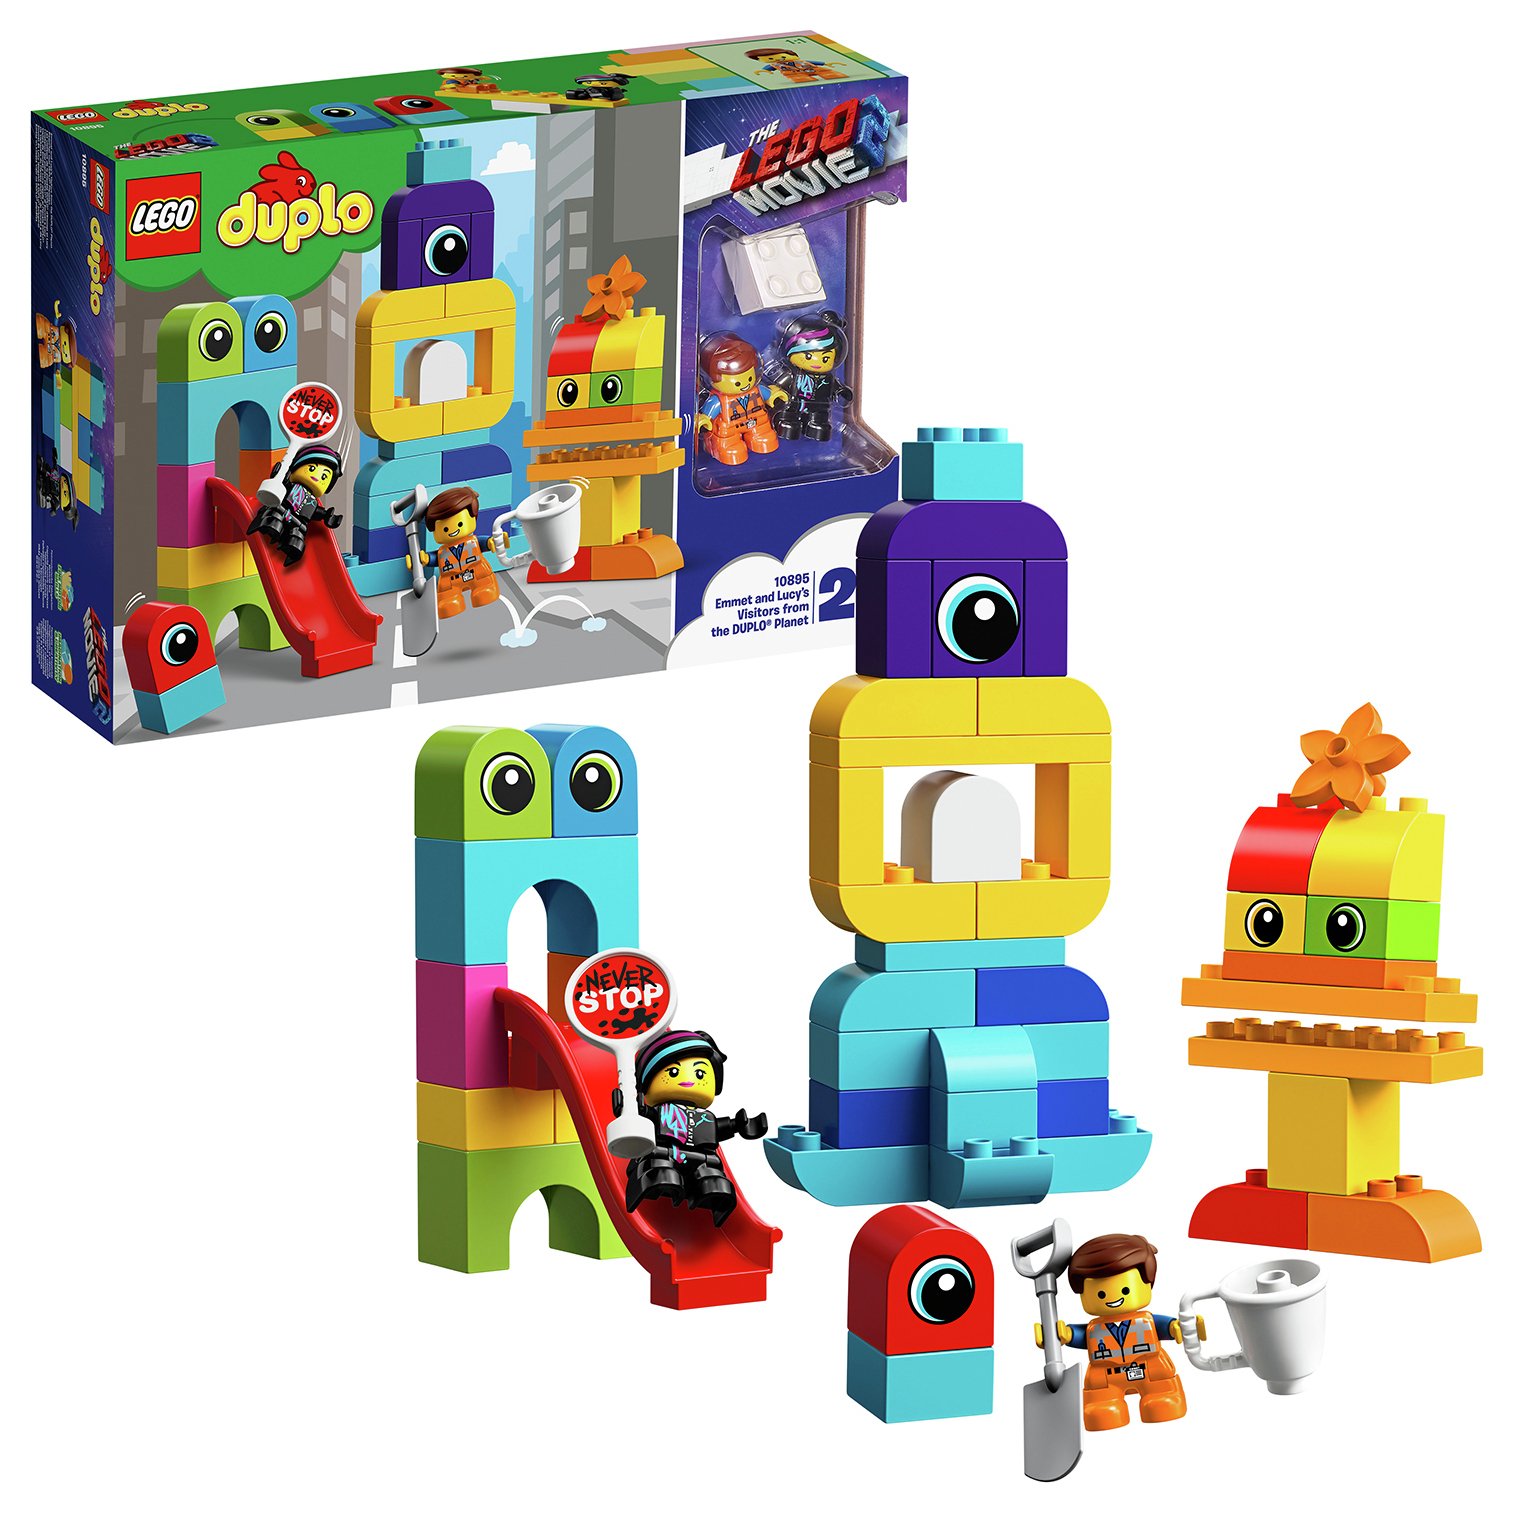 LEGO DUPLO LEGO Movie 2 Emmet and Lucy Playset review